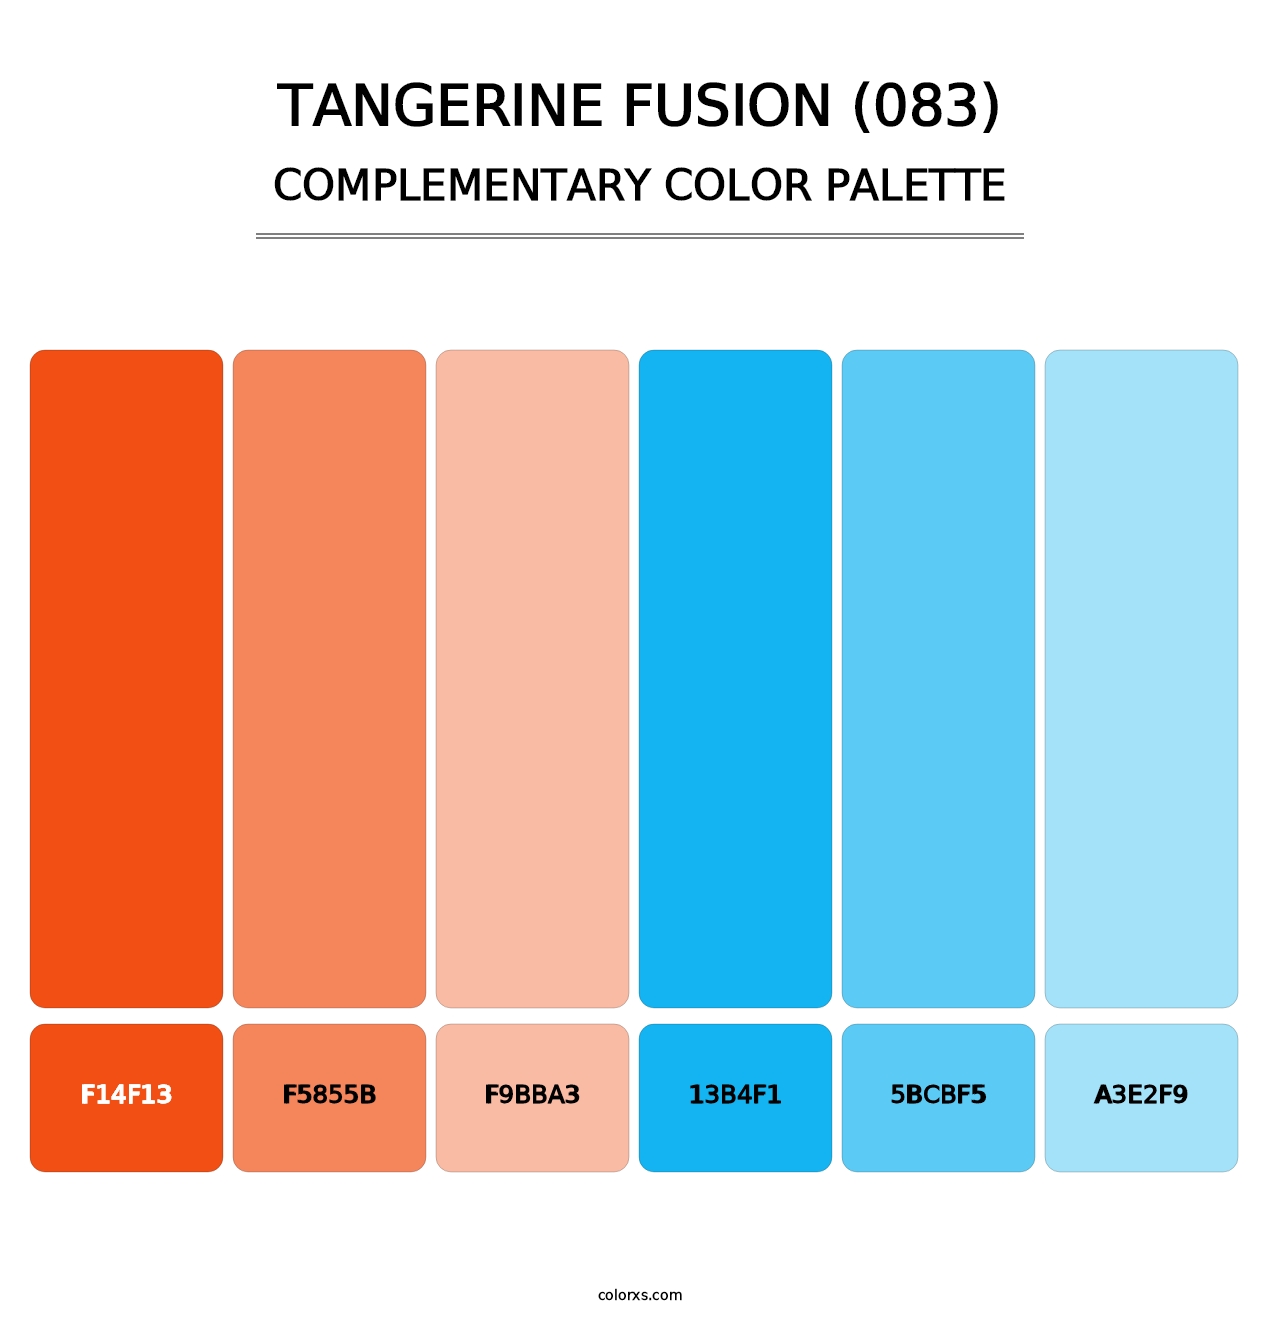 Tangerine Fusion (083) - Complementary Color Palette